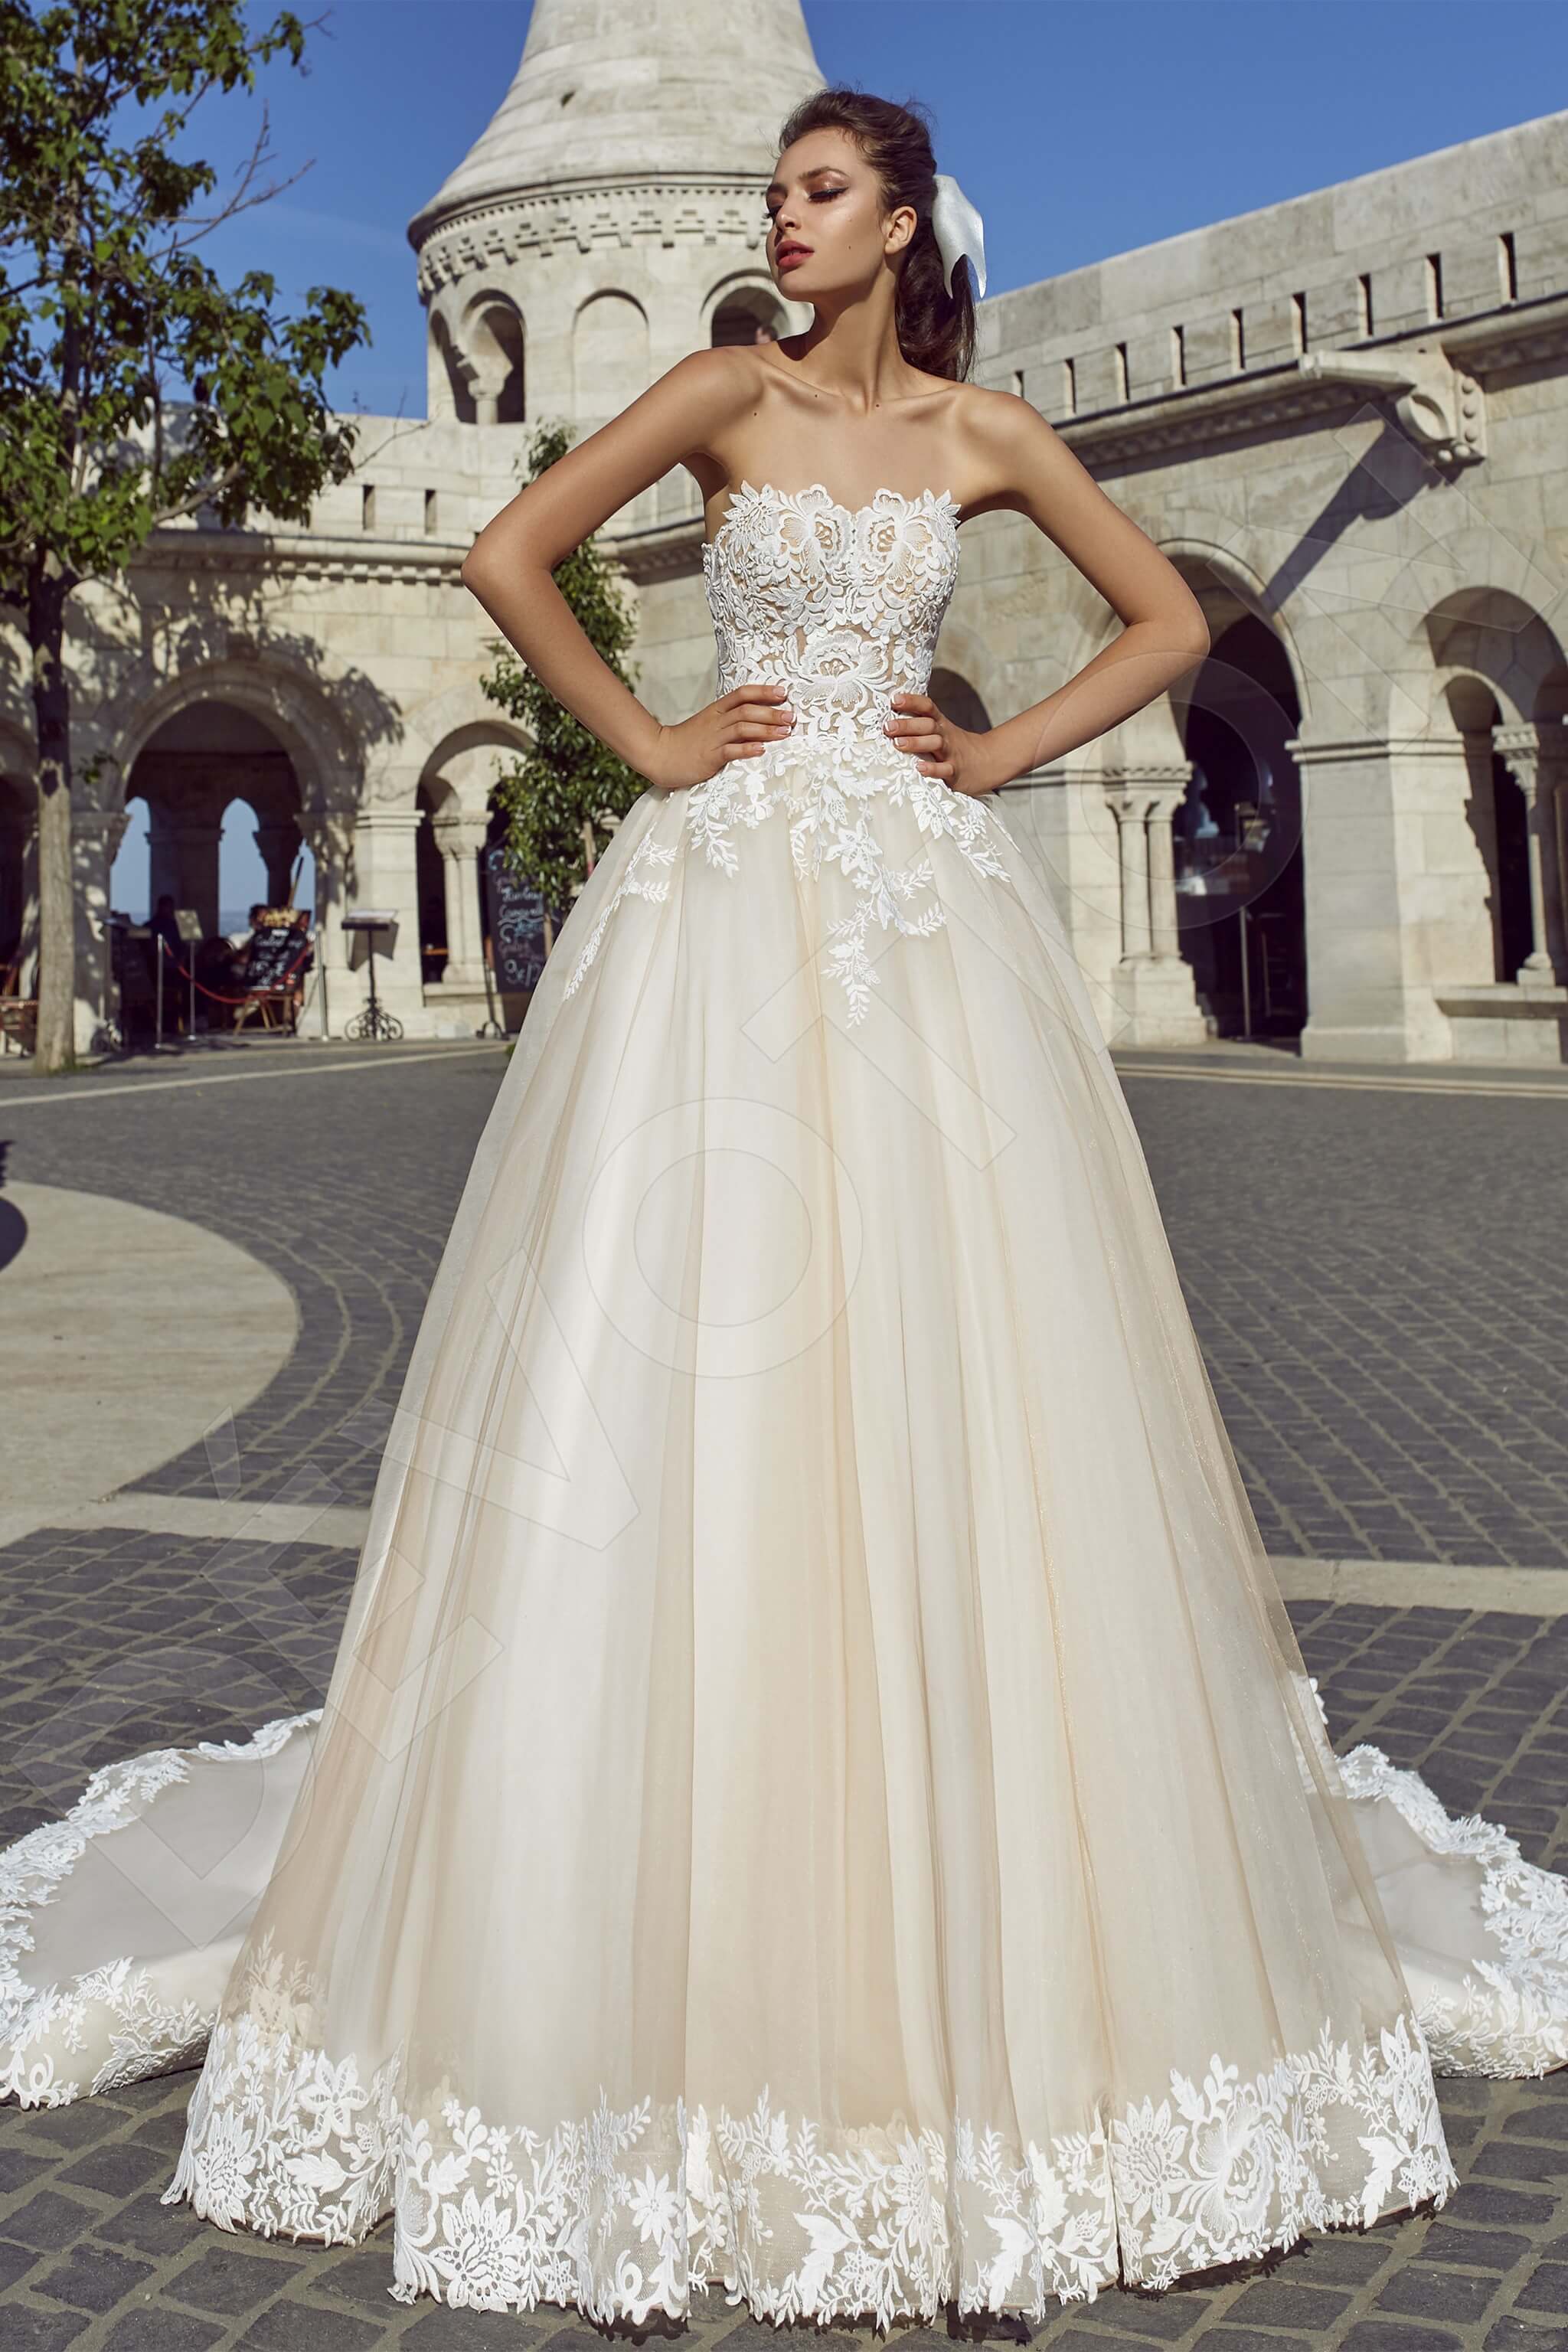 EDEN / Straight Neckline Wedding Dress with Romantic Lace Train - LaceMarry